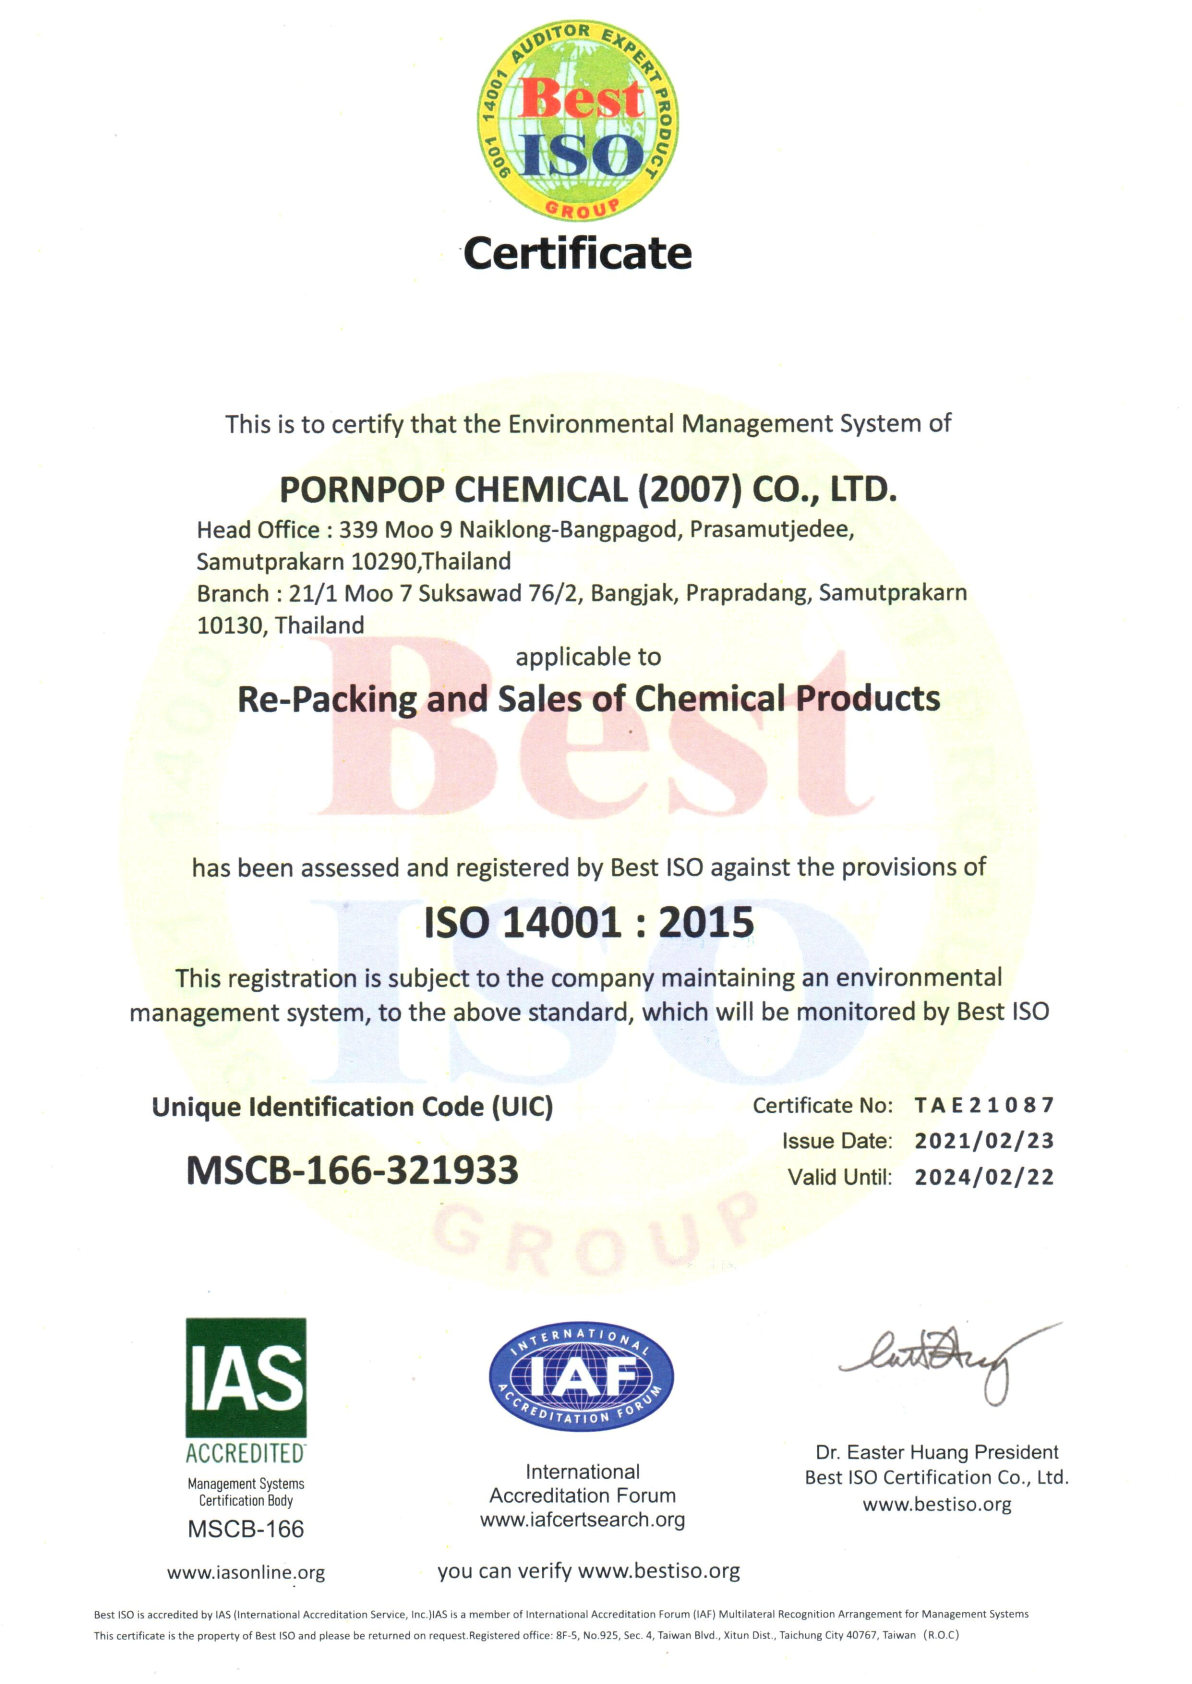 ISO 14001.2015